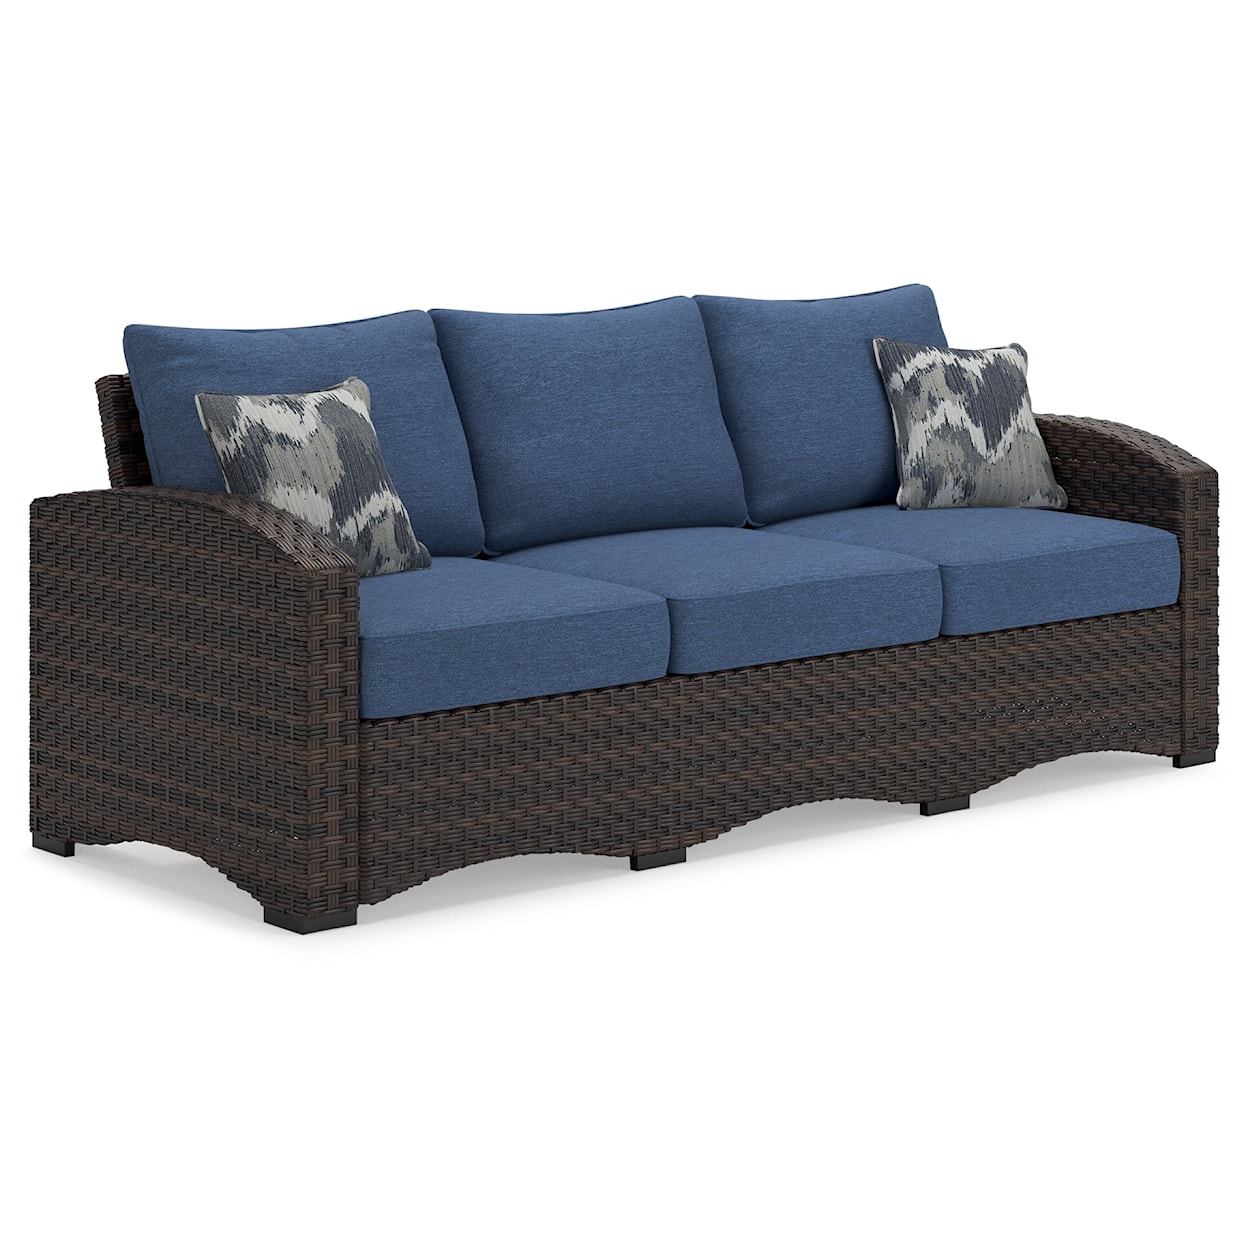 Signature Design Windglow Outdoor Sofa With Cushion